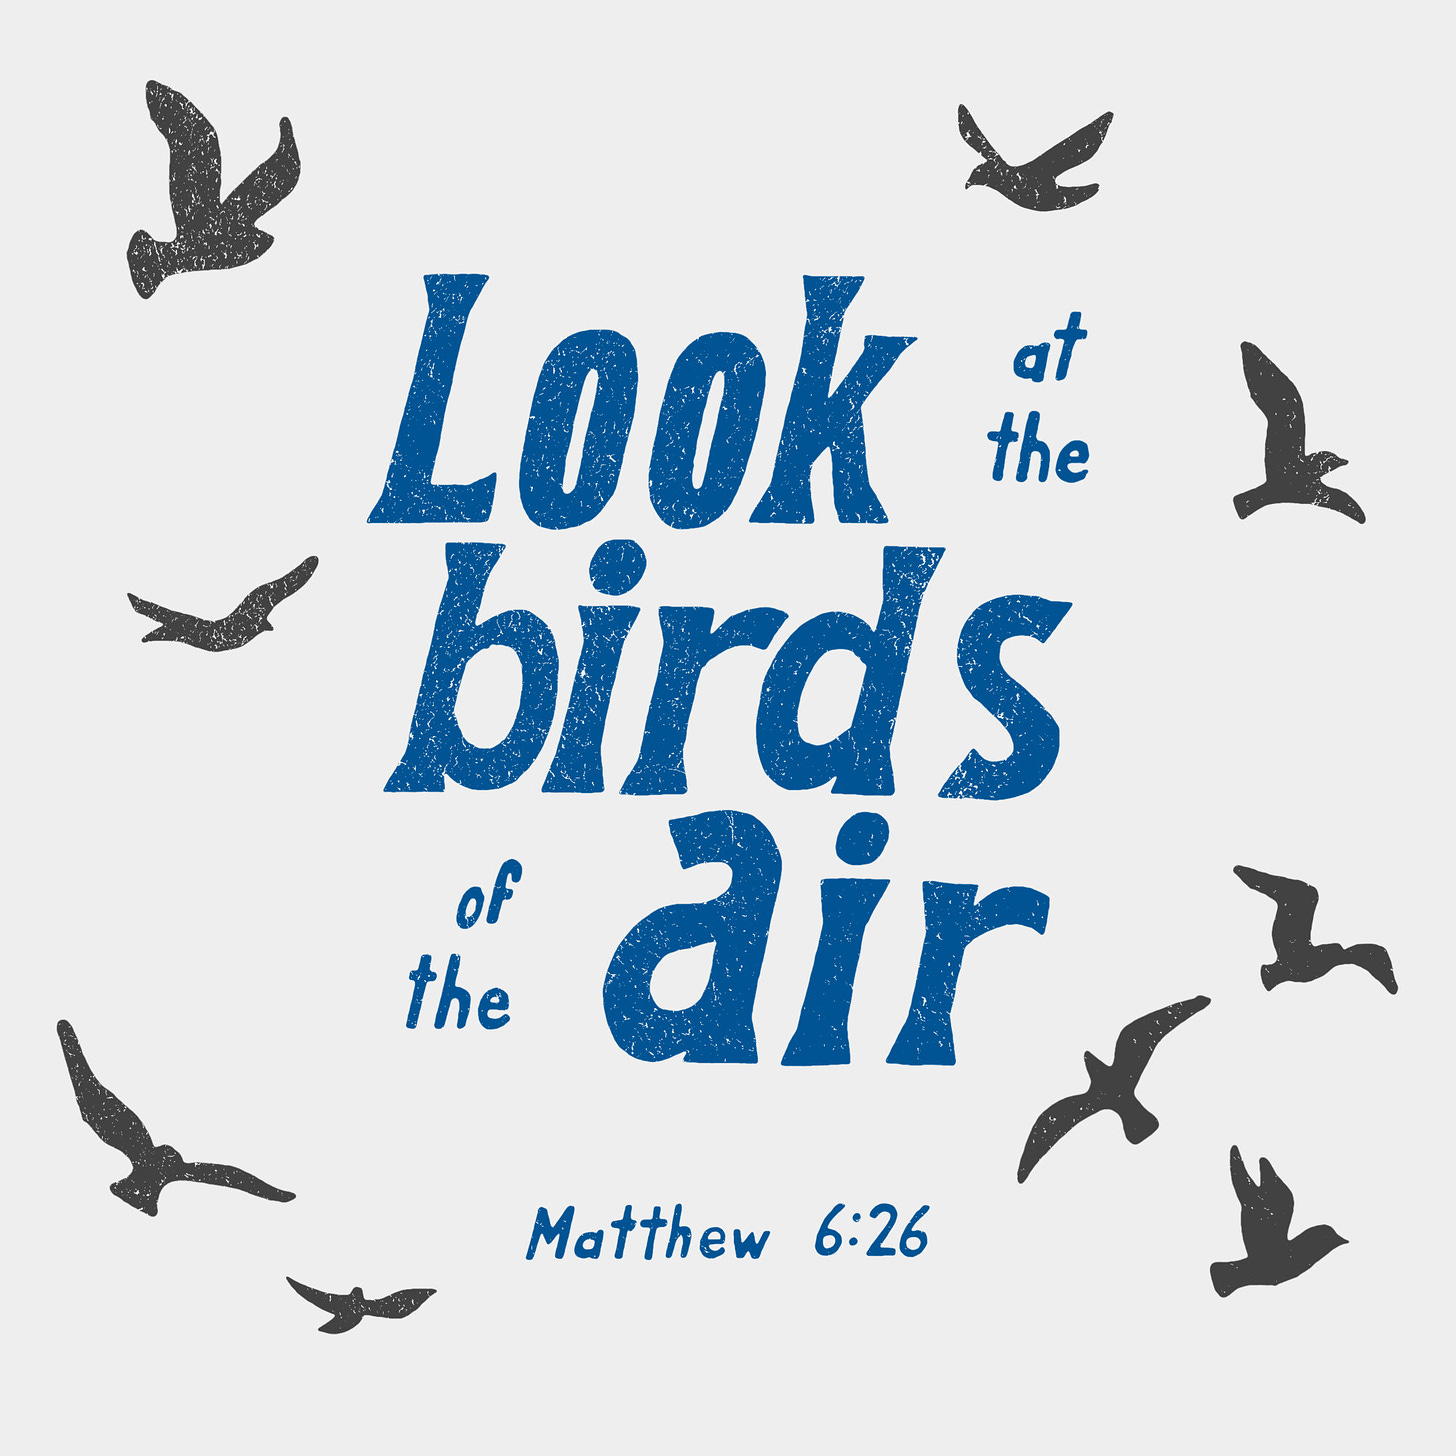 Black birds fly around blue text reading "Look at the birds of the air - Matthew 6:26"